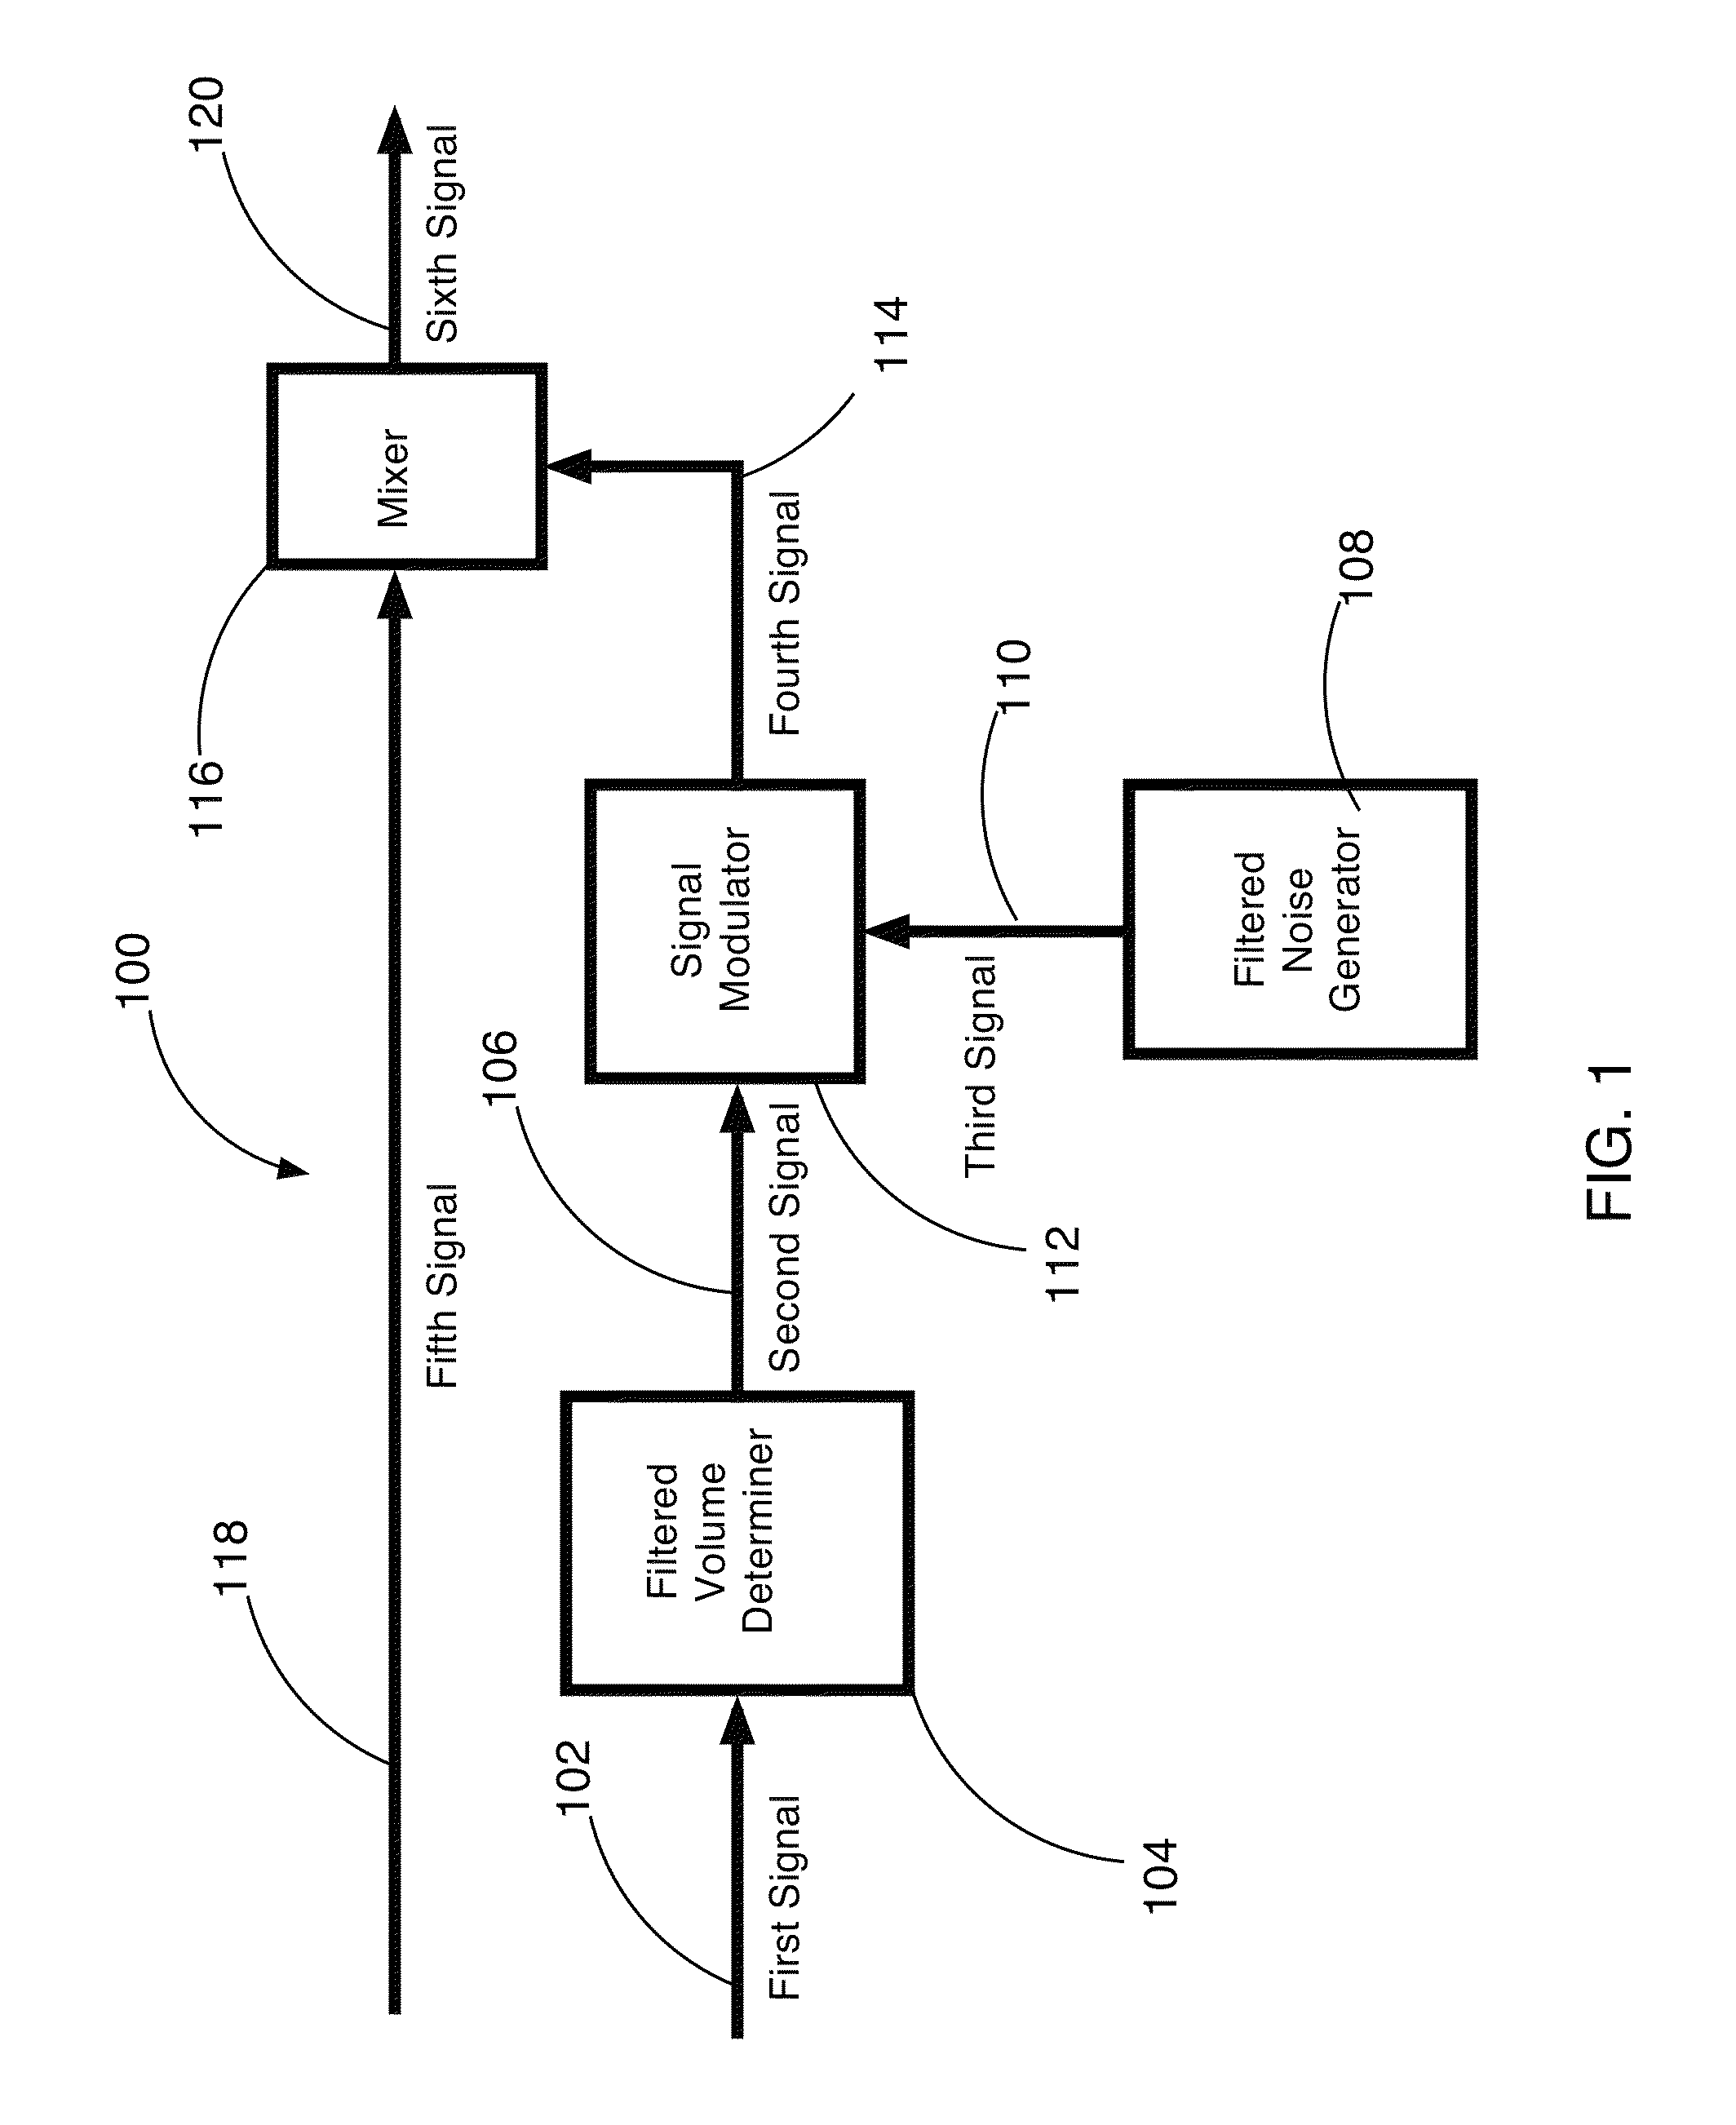 Method and apparatus for adding audible noise with time varying volume to audio devices